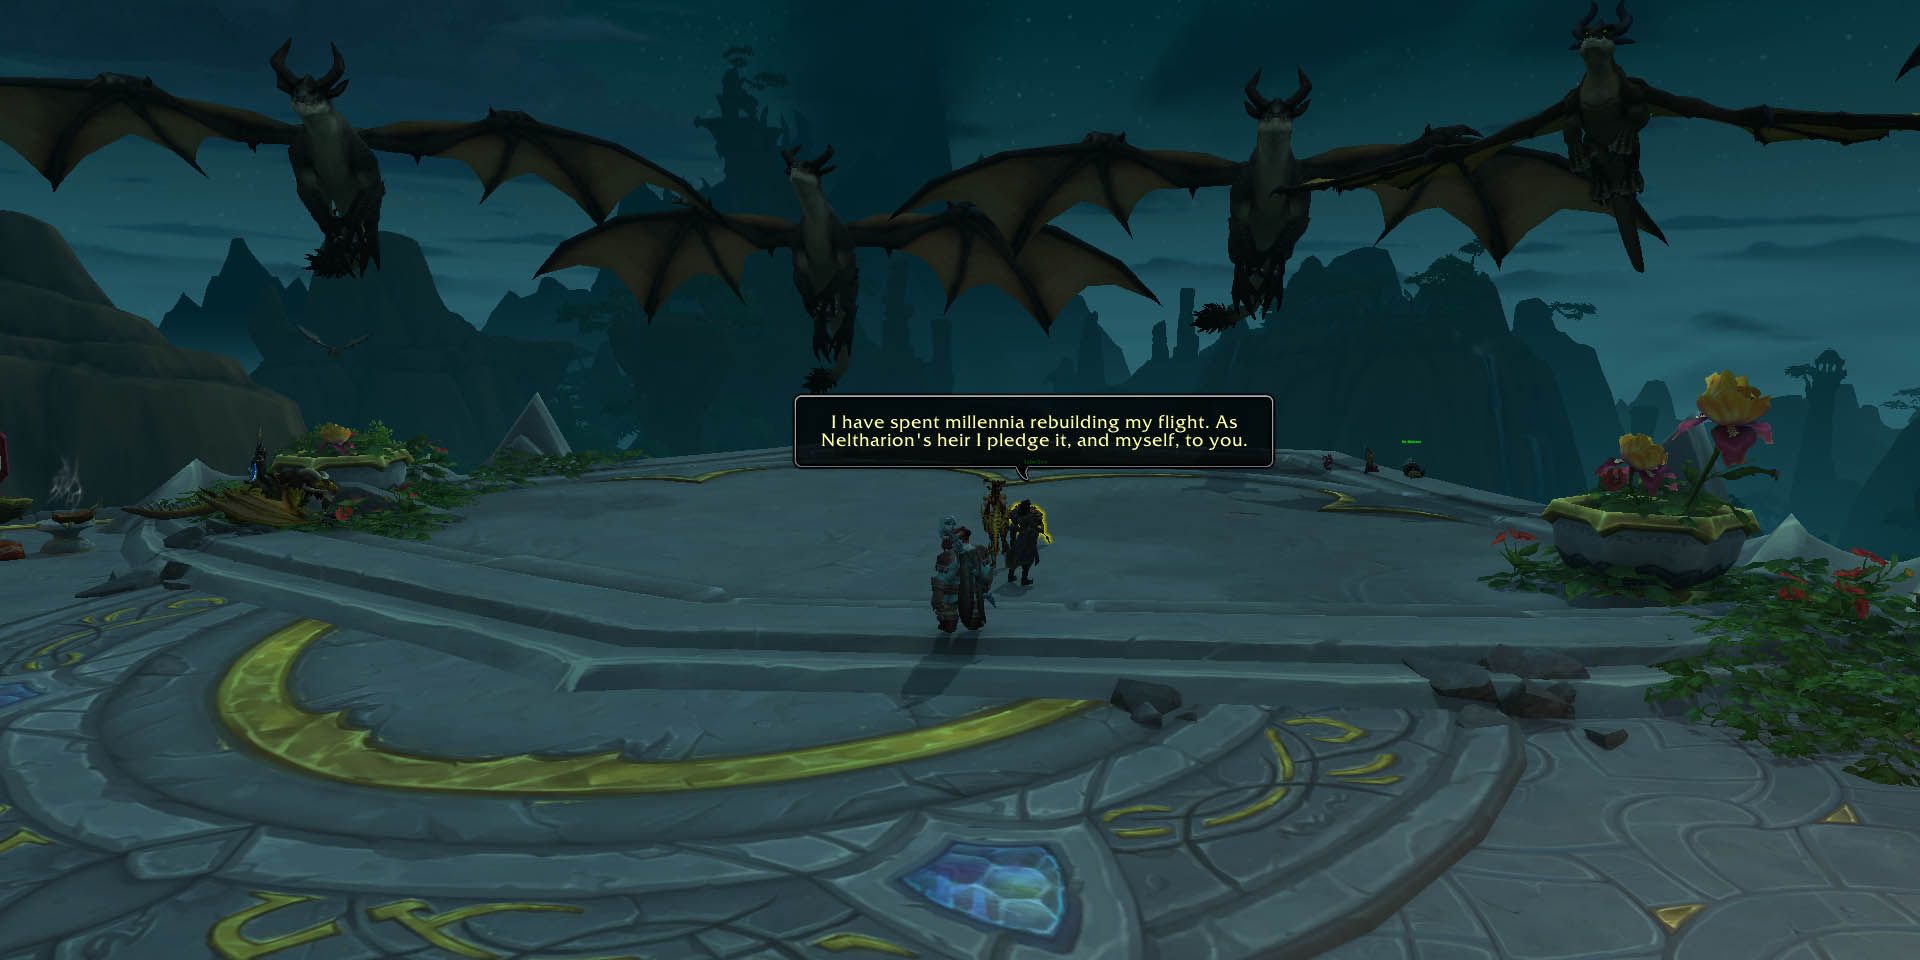 World Of Warcraft: four large dragons surround a group of people